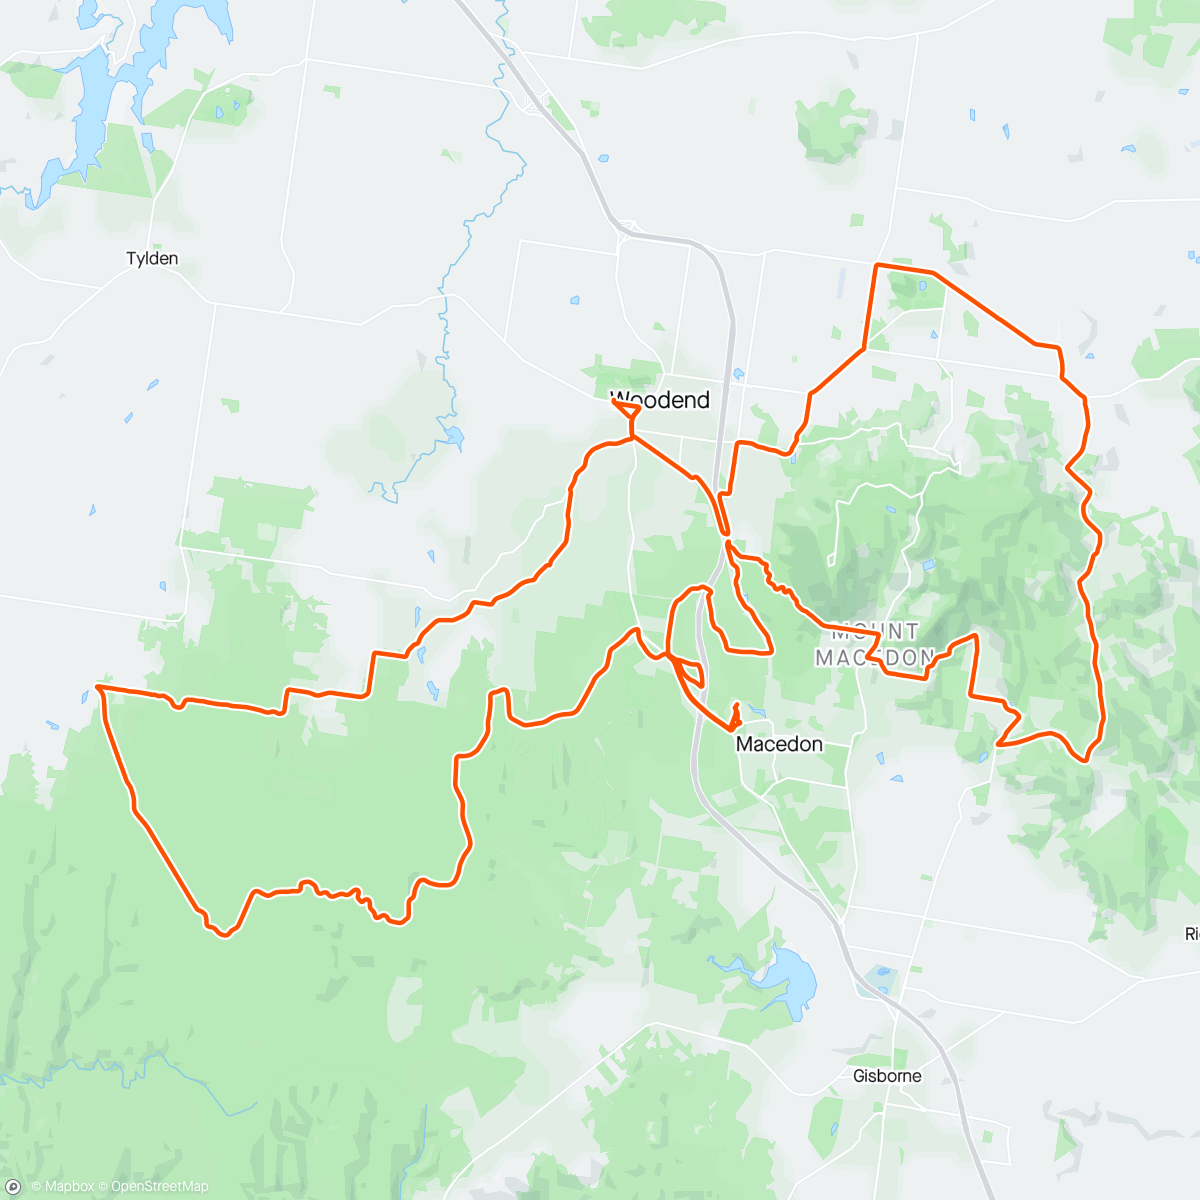 Map of the activity, Macedon Ranges GRAVEL Ride.
Extremely tough, and also got lost 😂😂